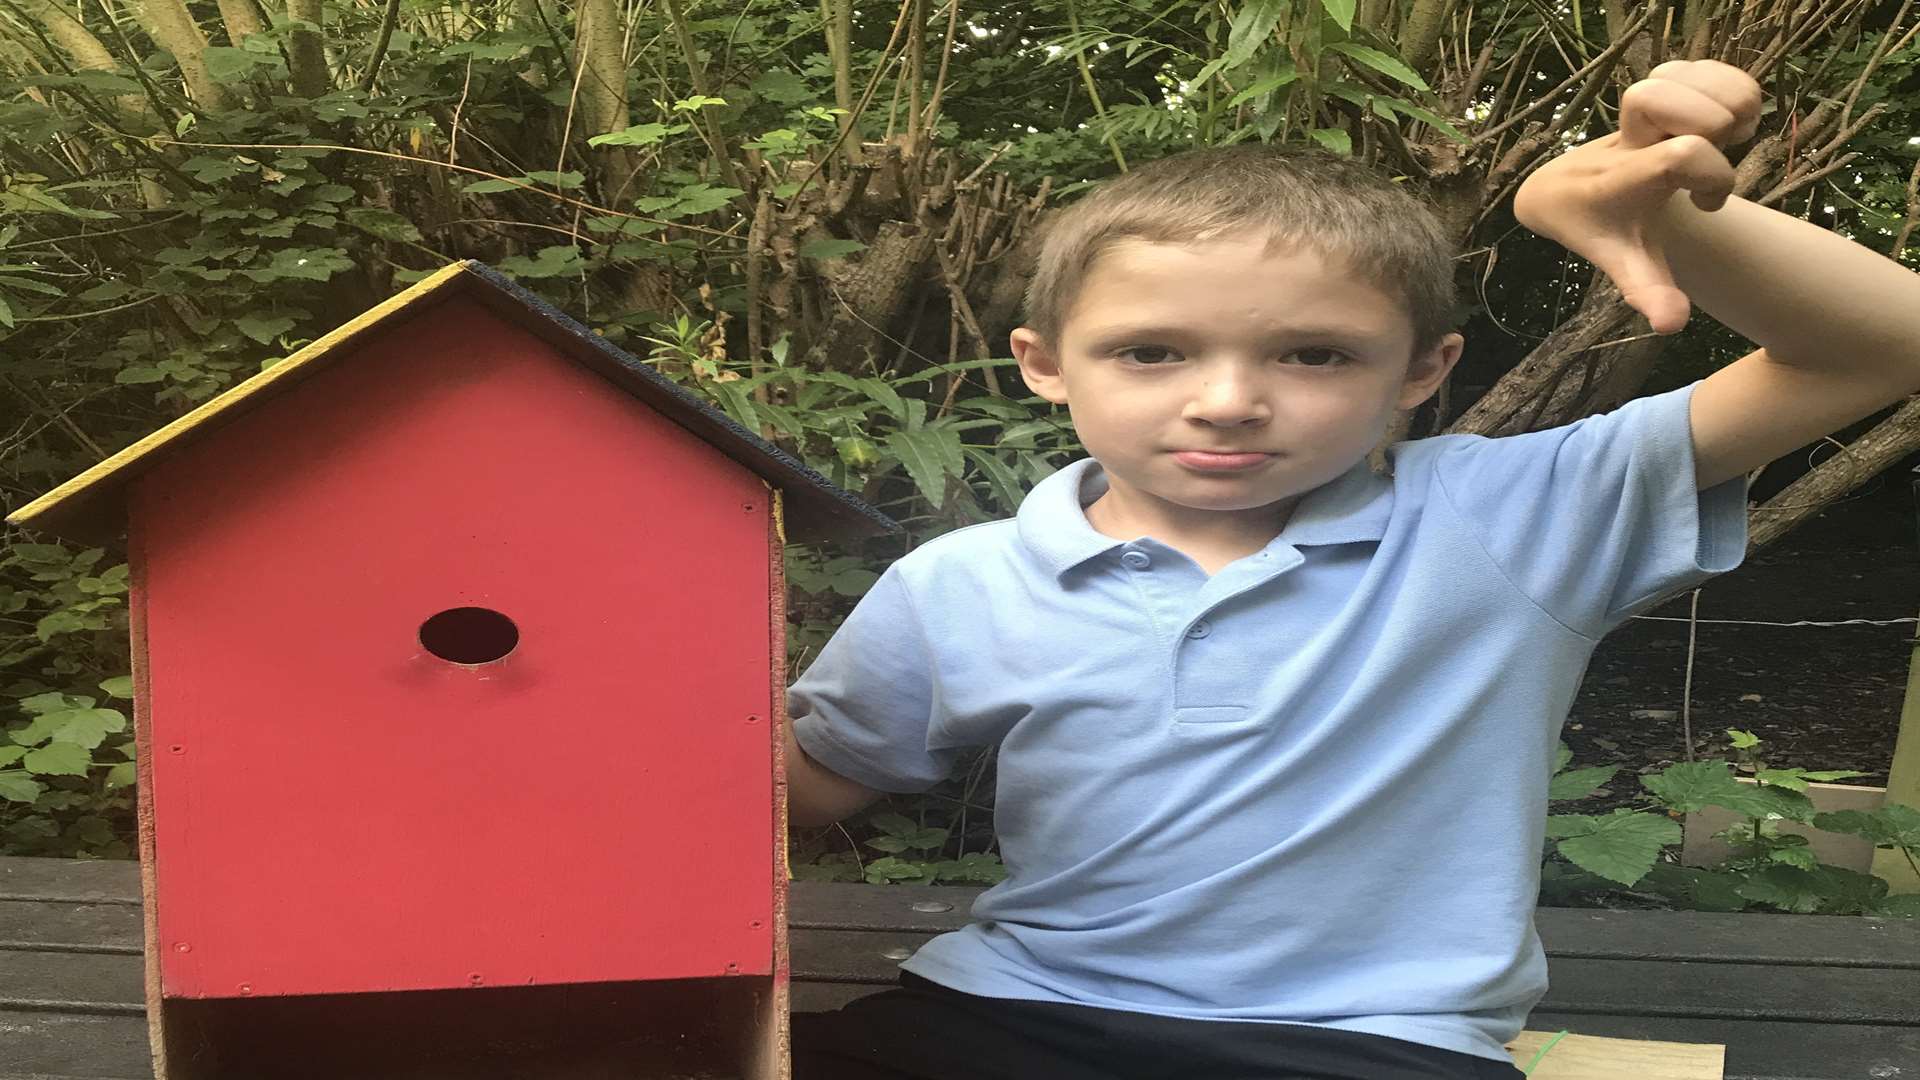 Seth Page, six, made this bird box which appeared to have been tampered with